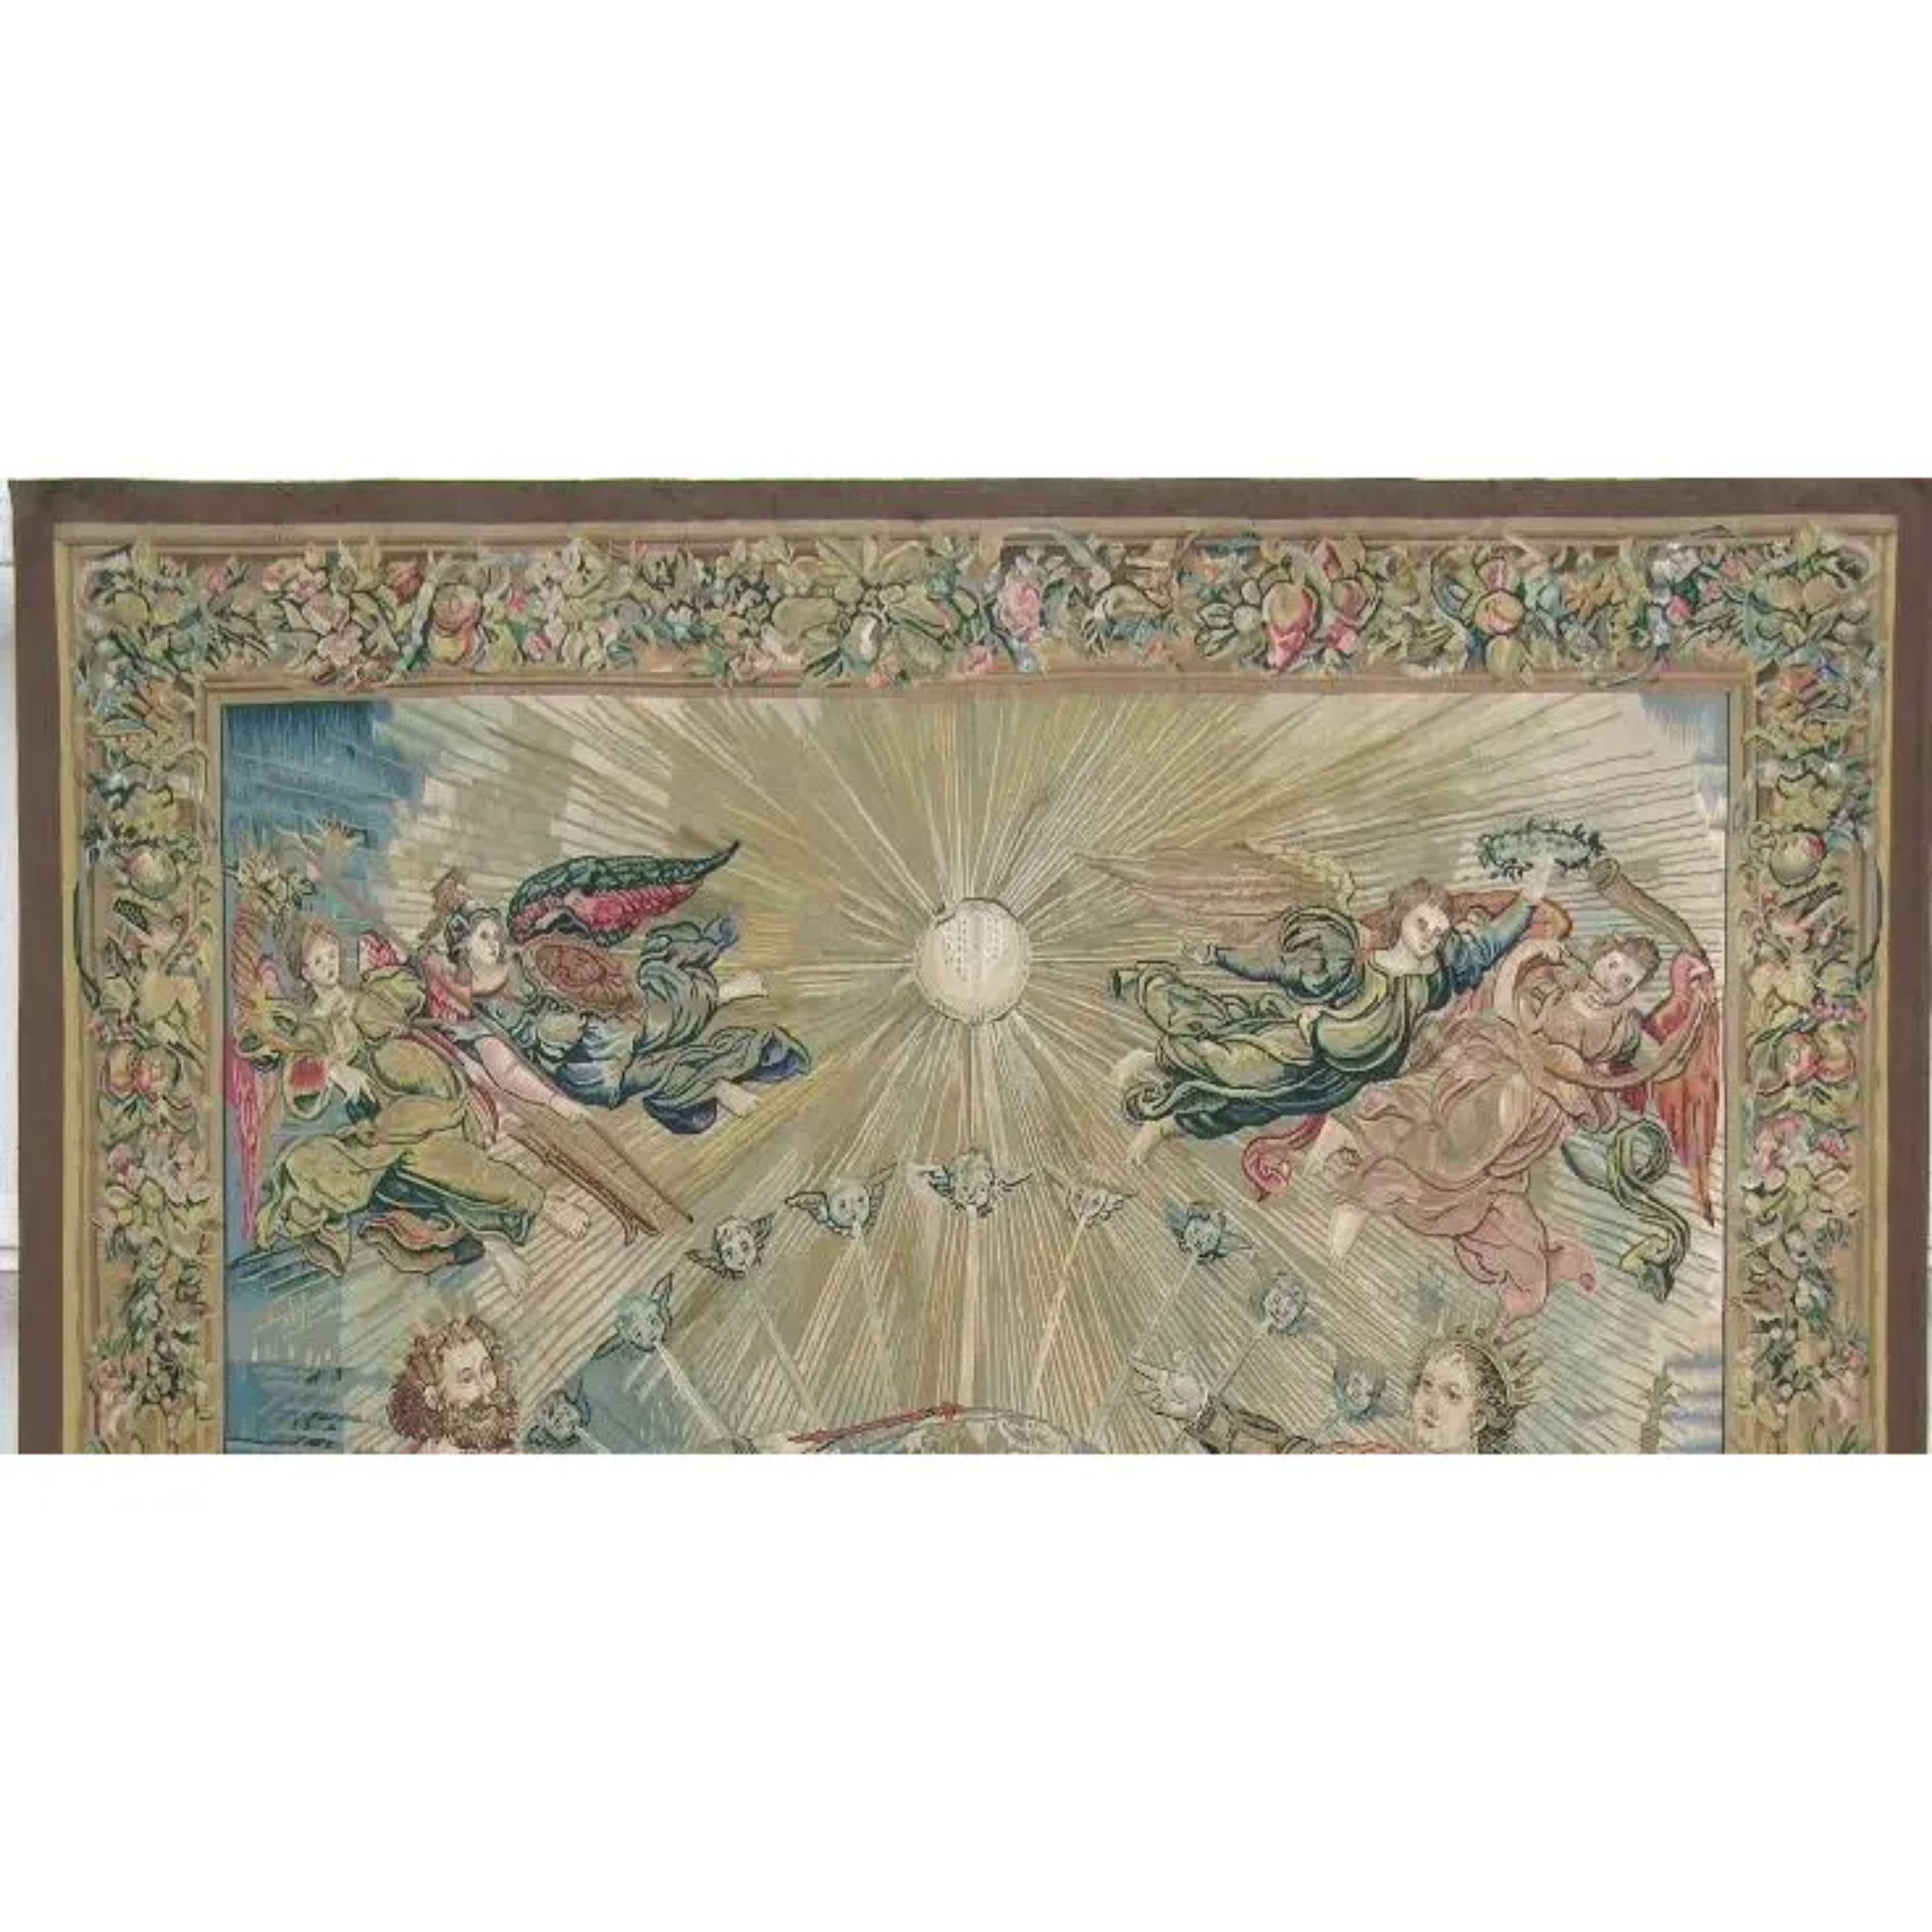 Unknown Vintage Tapestry Depicting Royalty and Angels 8X7 For Sale